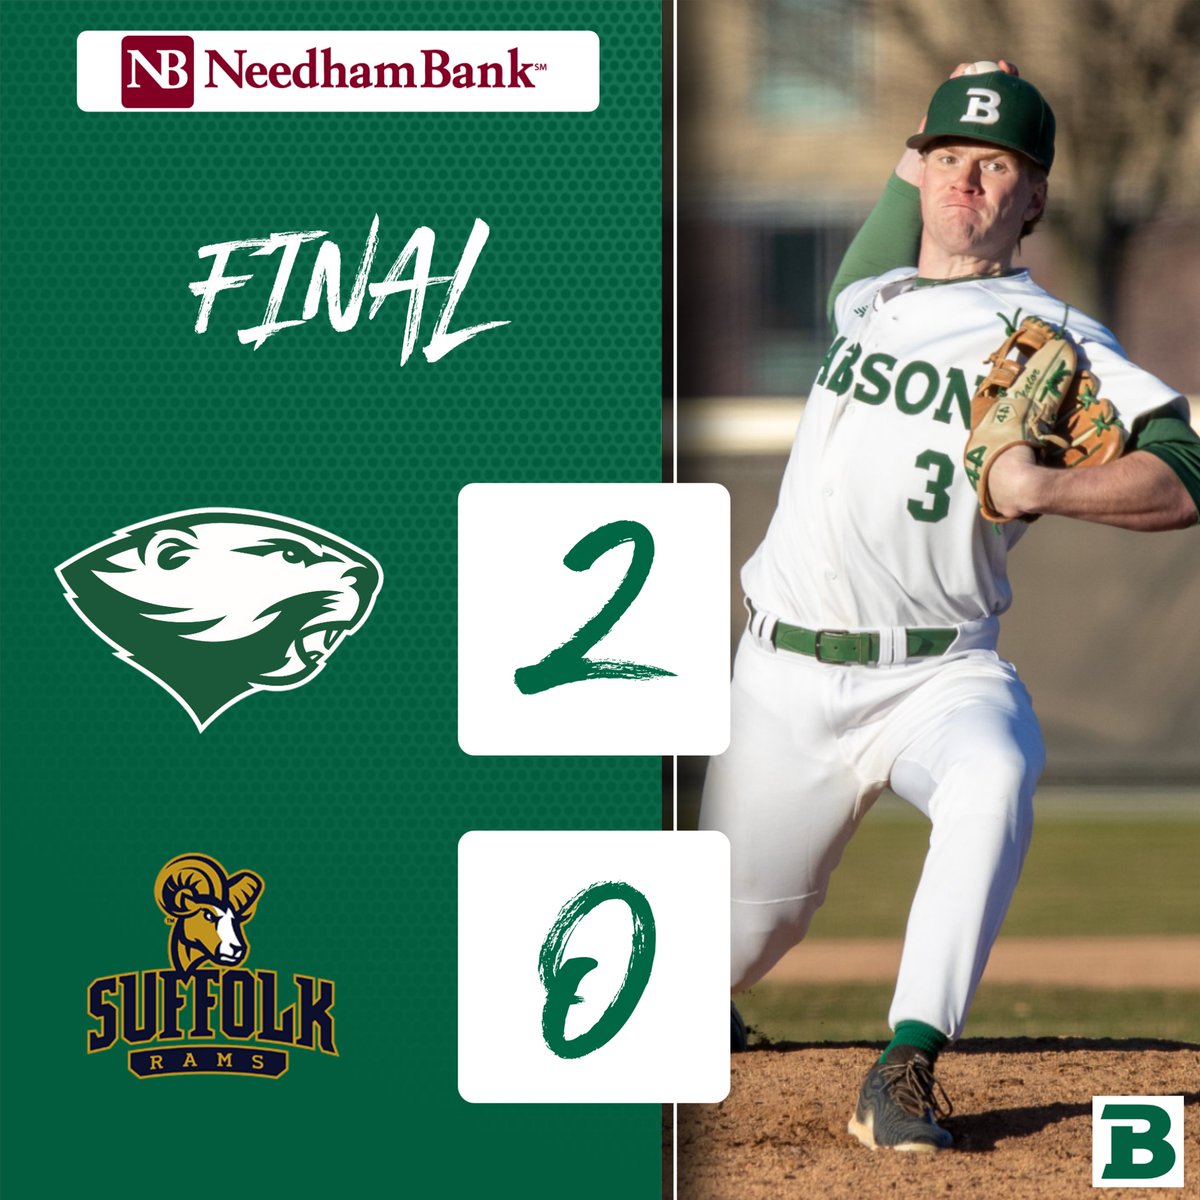 Ryan Hvozdovic drove in a run in the 2nd inning and the quartet of Luke McClintock, Matt Milone, Zach Magee and Zander Teator combined for a one-hit shutout as @BabsonBaseball defeated @gosuffolkrams, 2-0, on Wednesday for its fourth straight win. #GoBabo #d3baseball